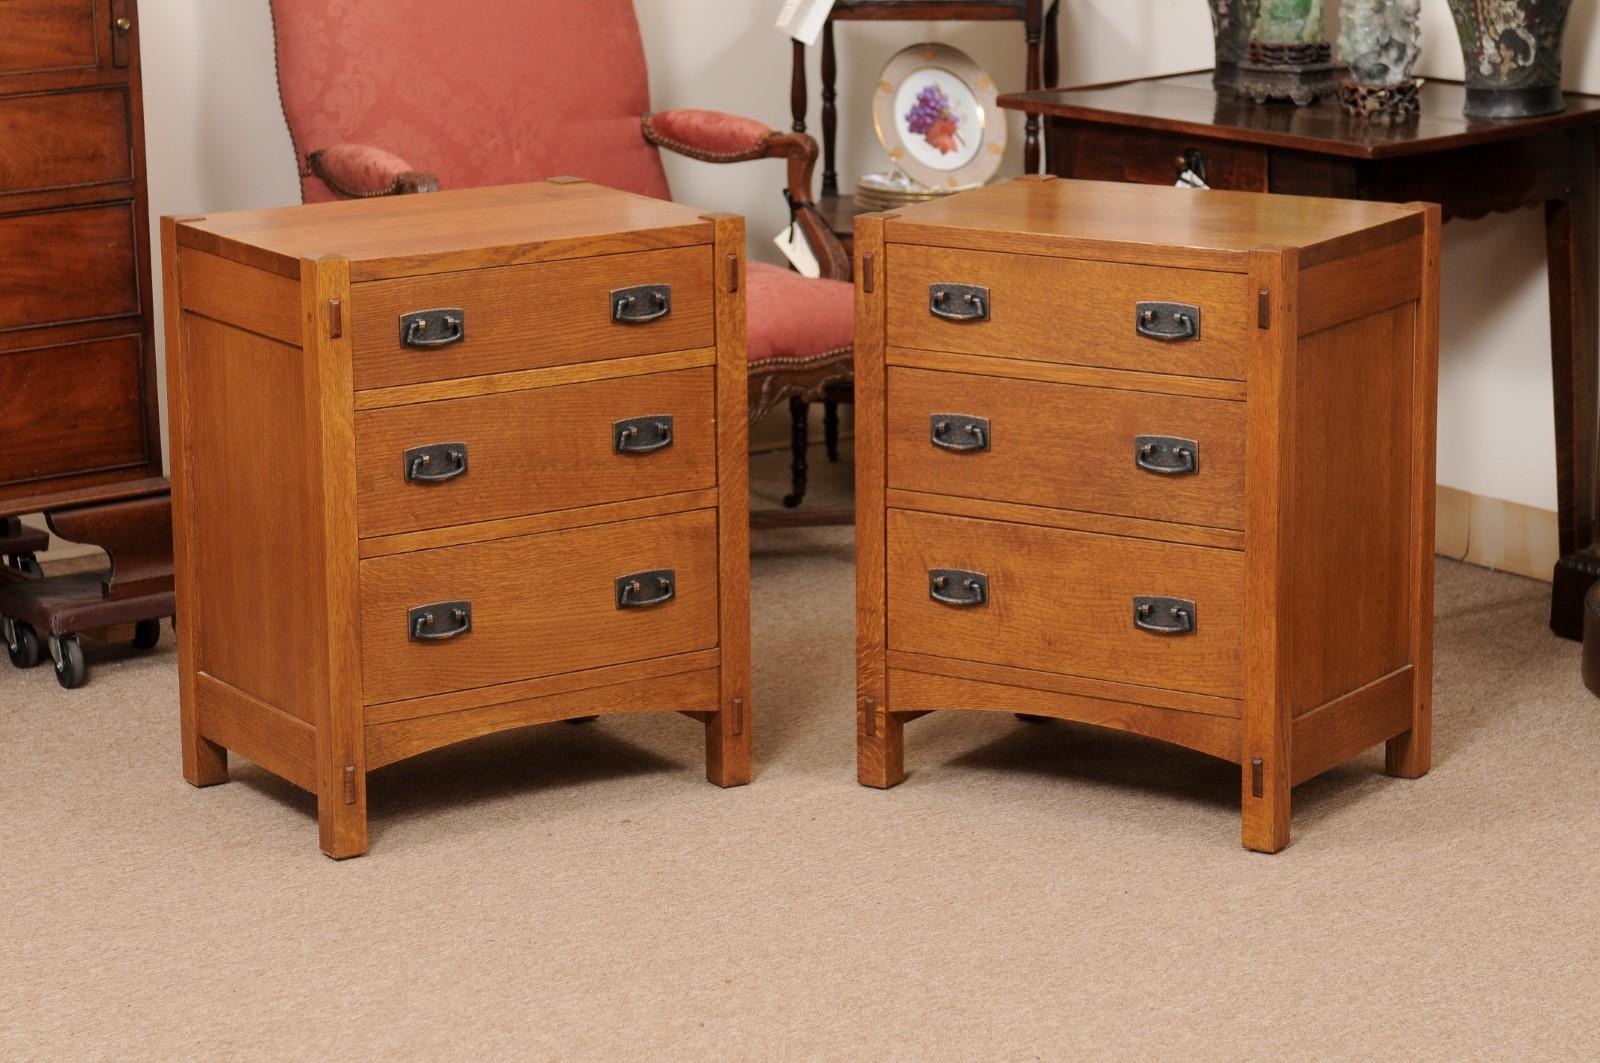 Pair of Stickley Mission Style Oak Nightstands / Side Tables with Drawers 4